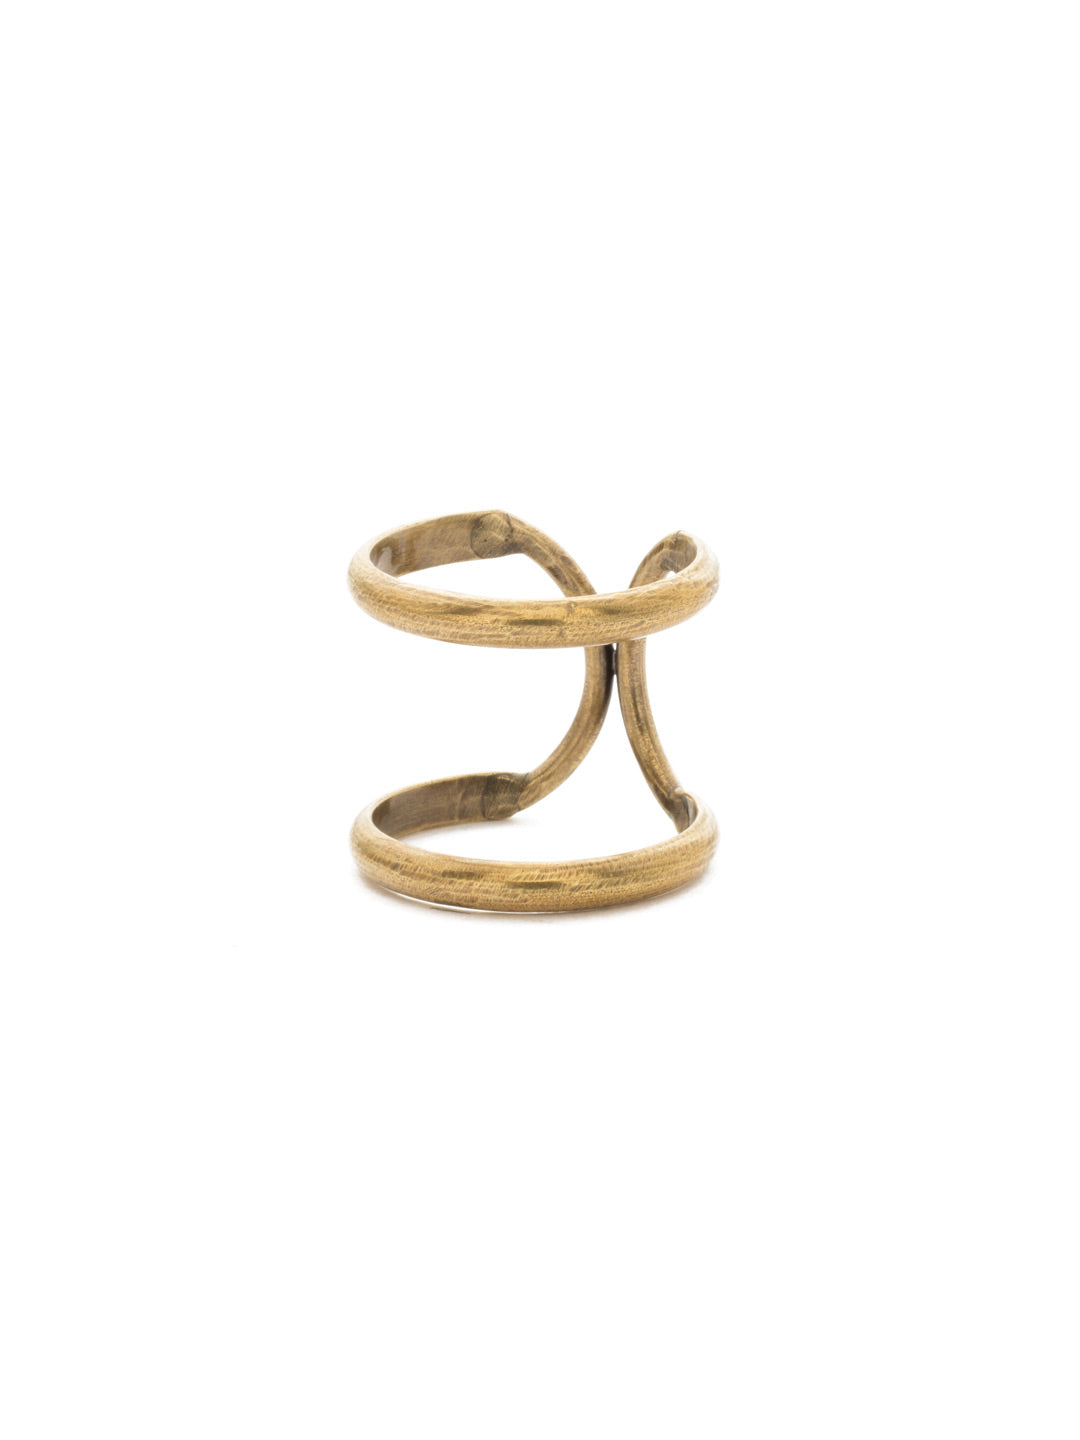 Running In Circles Stacked Ring - RDW3AGCRY